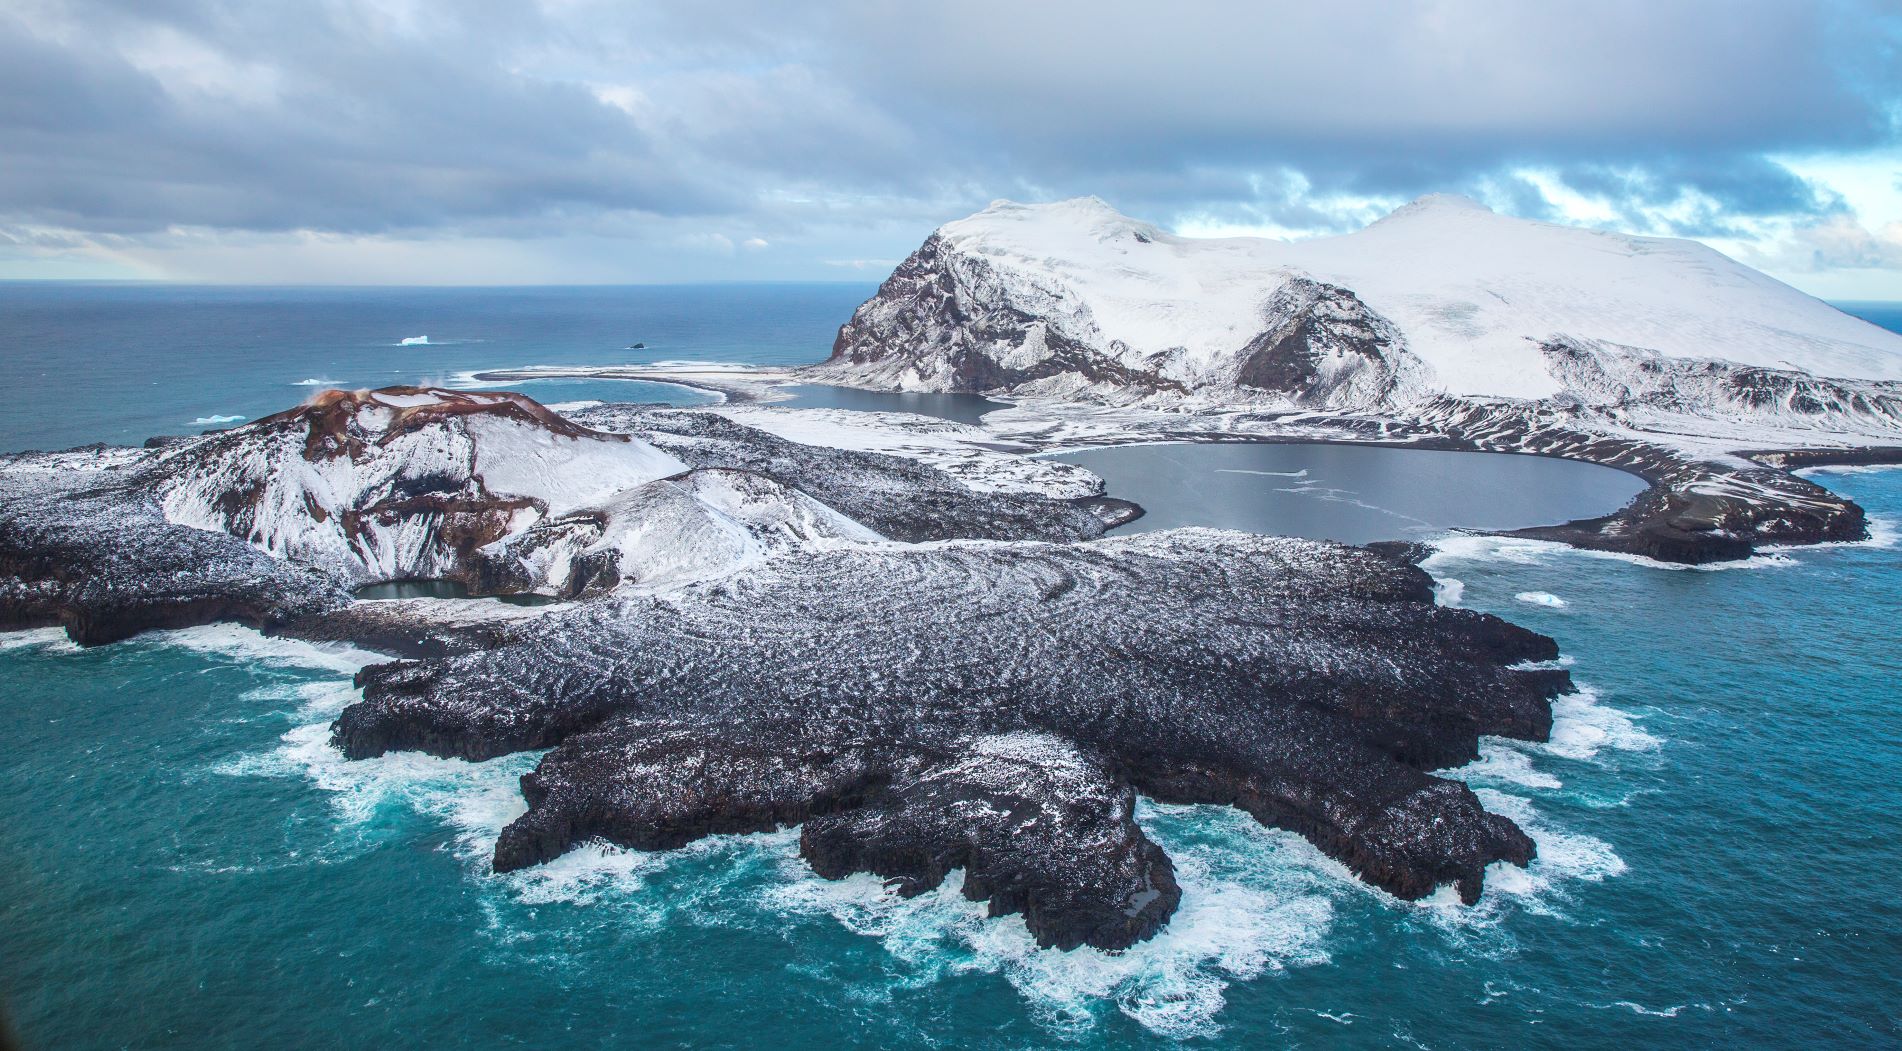 New Research sheds light on Marine Biodiversity of South Sandwich Islands